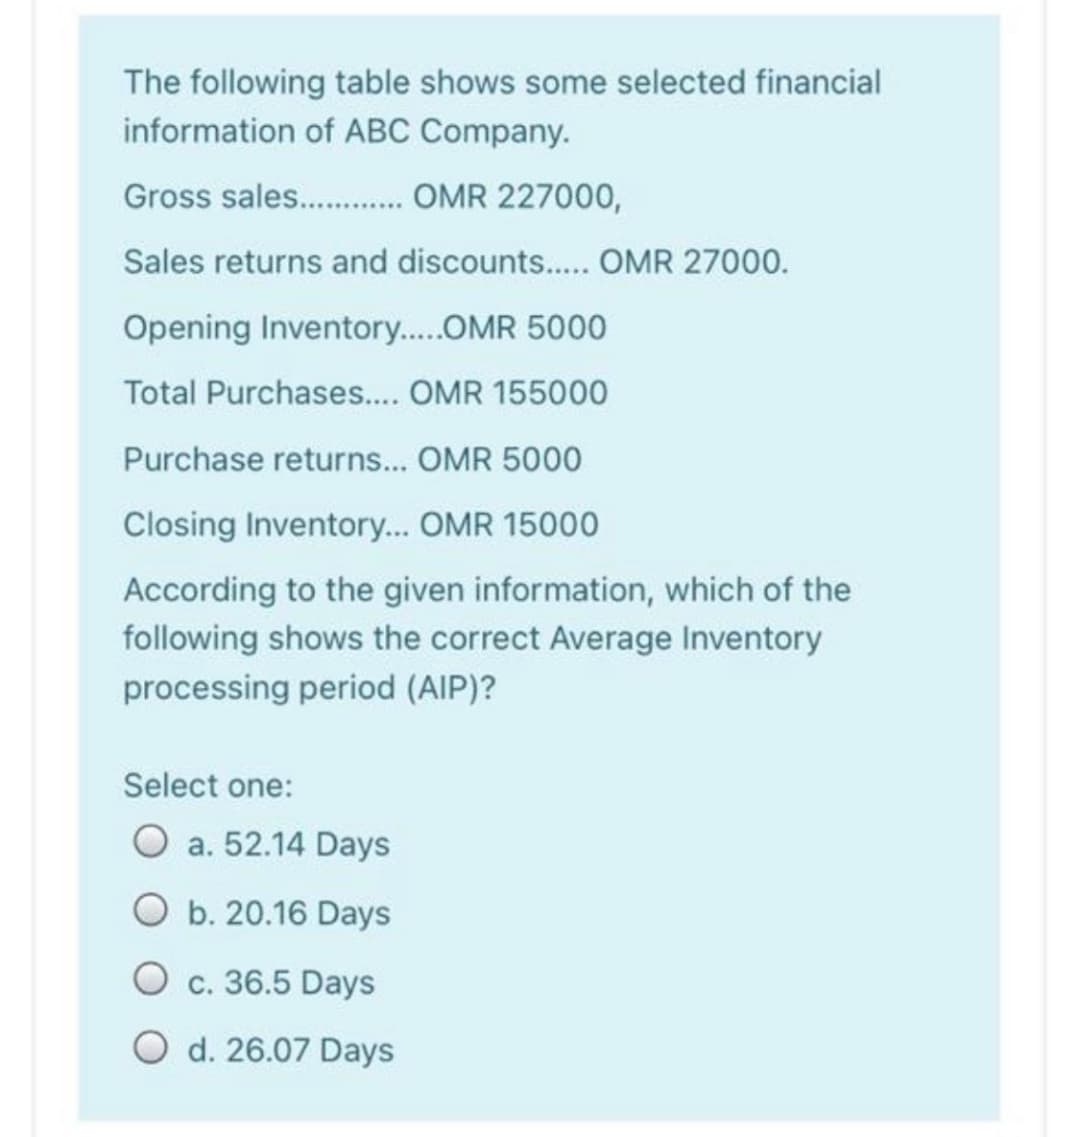 The following table shows some selected financial
information of ABC Company.
Gross sales. . OMR 227000,
Sales returns and discounts.... OMR 27000.
Opening Inventory..OMR 5000
Total Purchases.. OMR 155000
Purchase returns... OMR 5000
Closing Inventory.. OMR 15000
According to the given information, which of the
following shows the correct Average Inventory
processing period (AIP)?
Select one:
O a. 52.14 Days
O b. 20.16 Days
O c. 36.5 Days
O d. 26.07 Days
